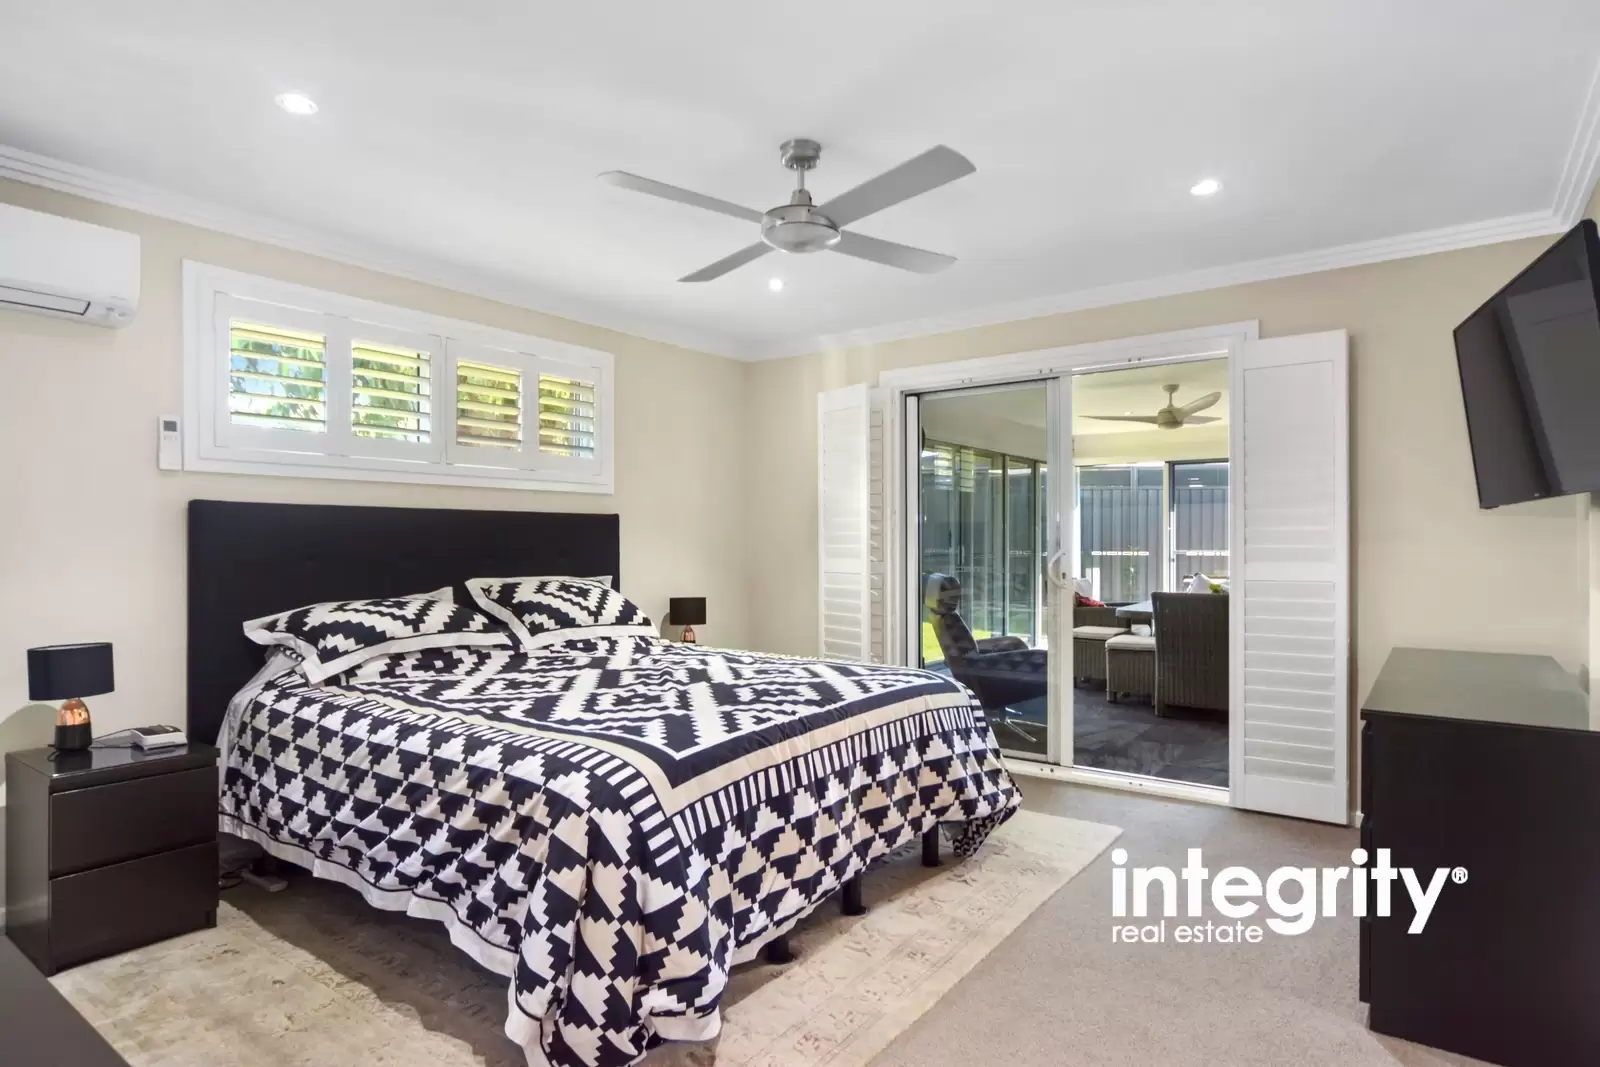 11 Trawler Street, Vincentia Sold by Integrity Real Estate - image 7